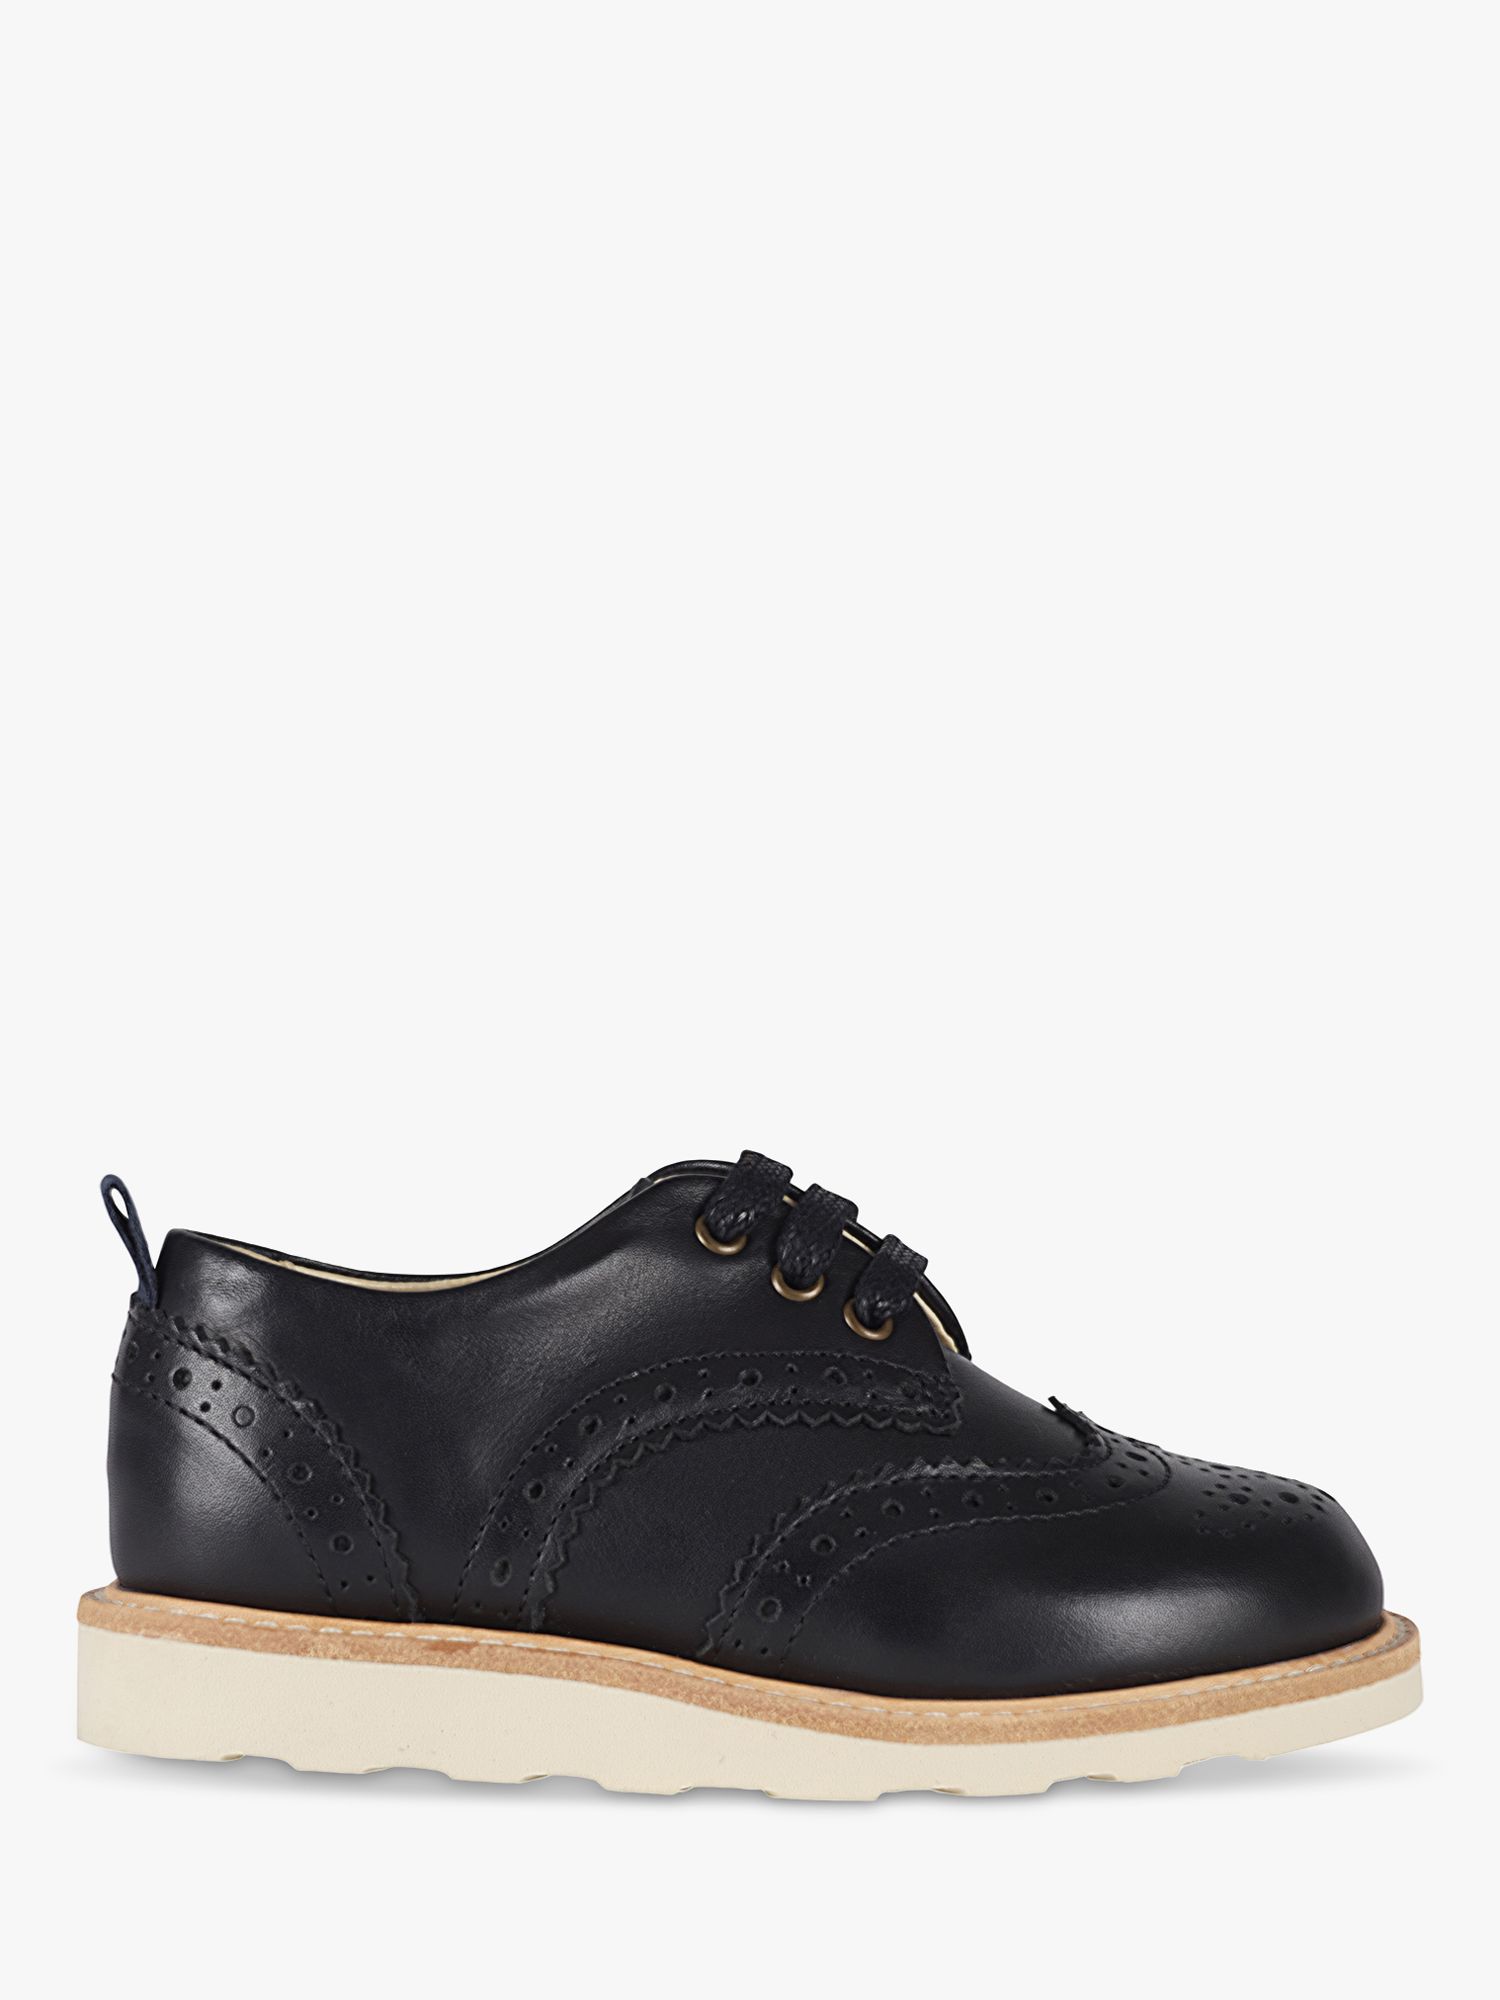 Young Soles Kids' Brando Leather Brogues, Black, 12 Jnr